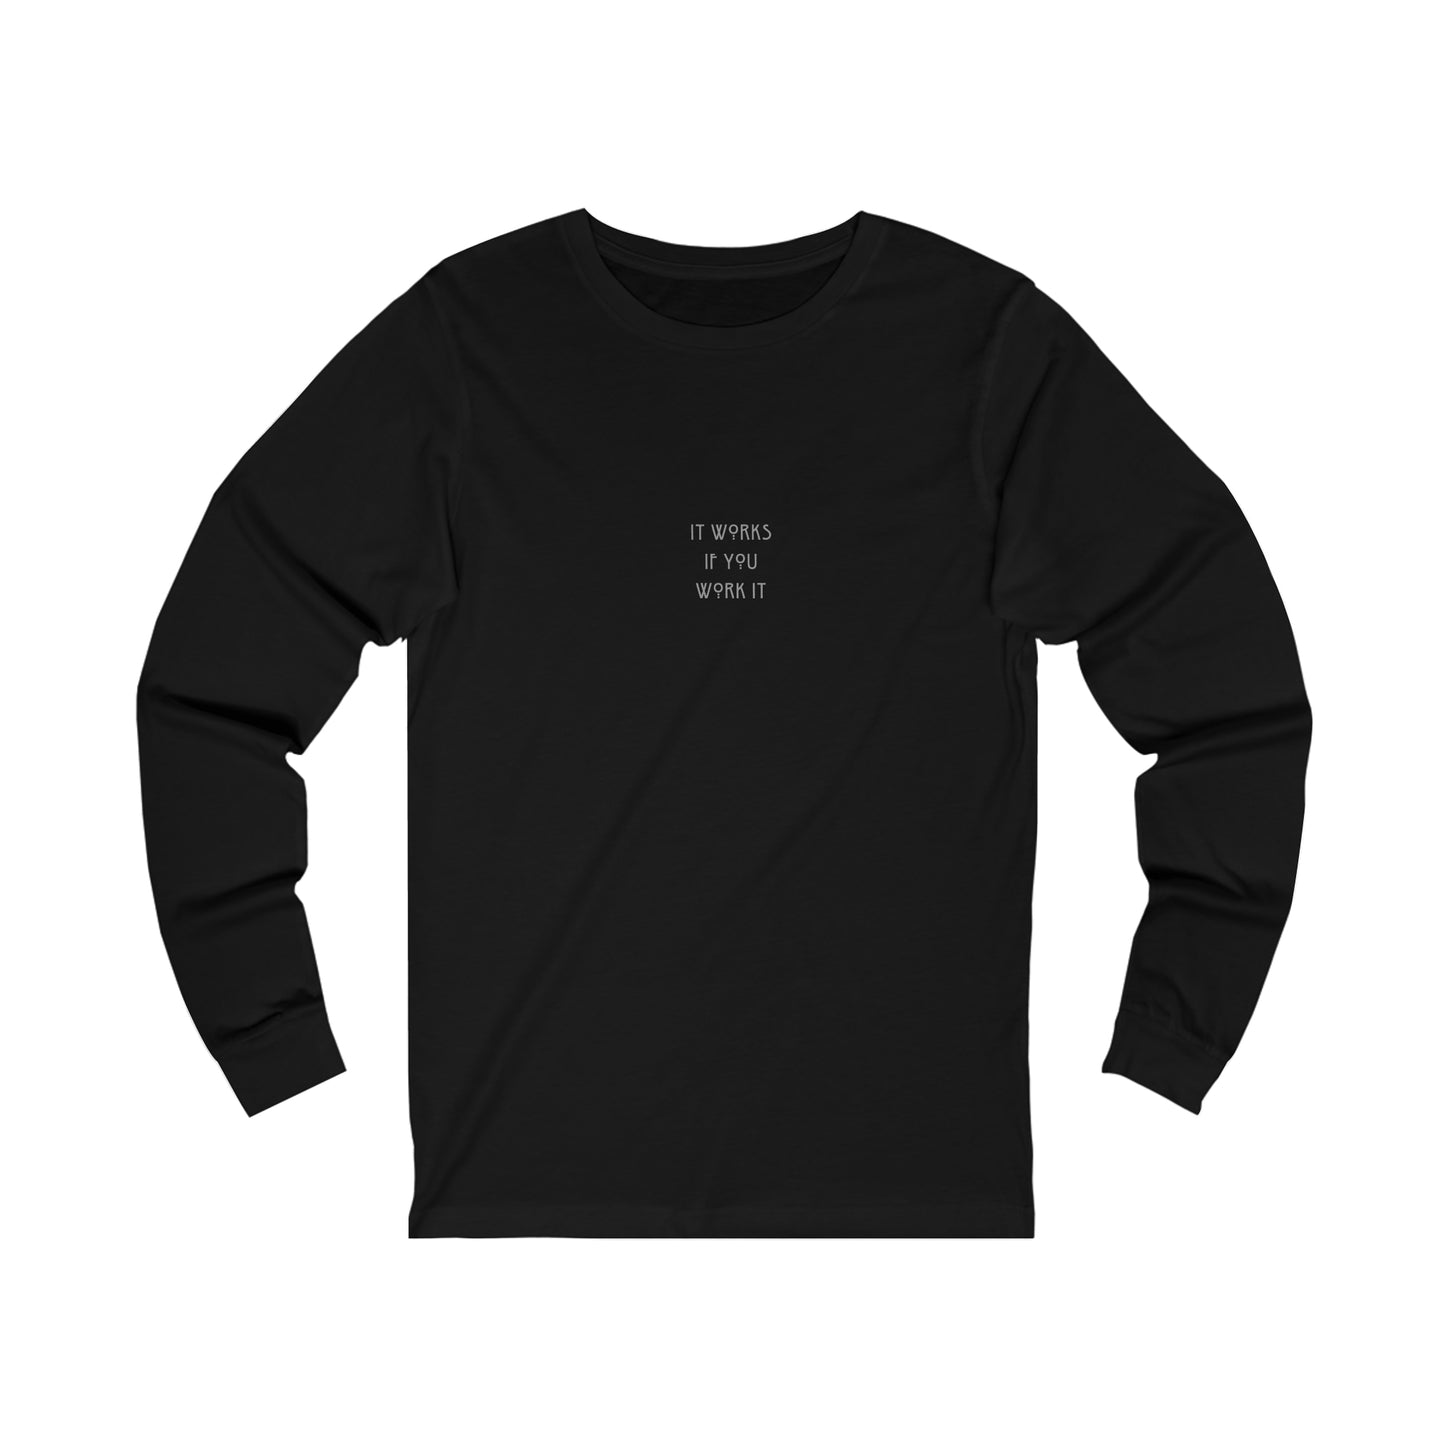 "It Works If You Work It" Unisex Long Sleeve Recovery Tee